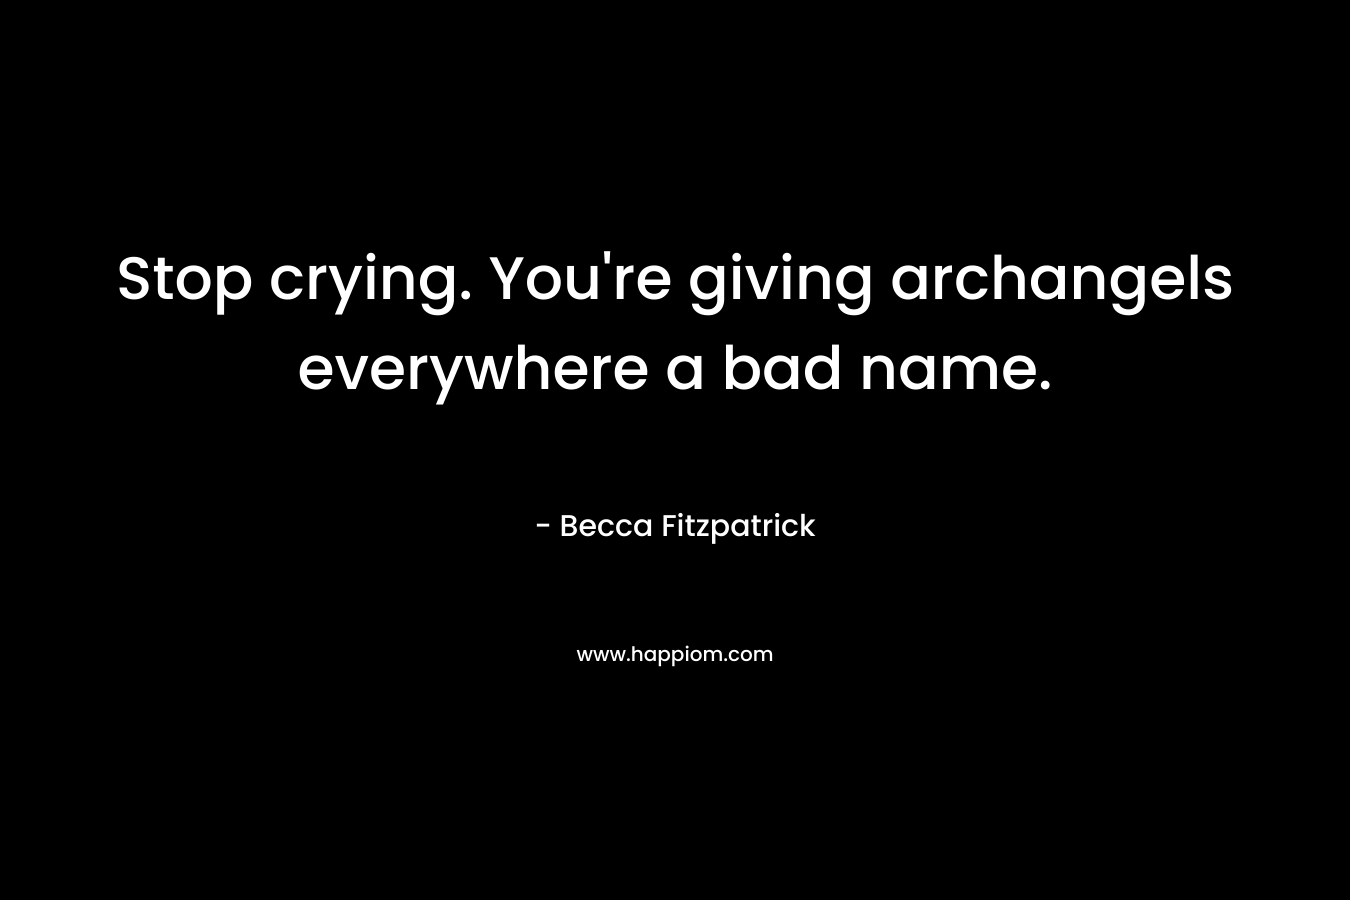 Stop crying. You’re giving archangels everywhere a bad name. – Becca Fitzpatrick